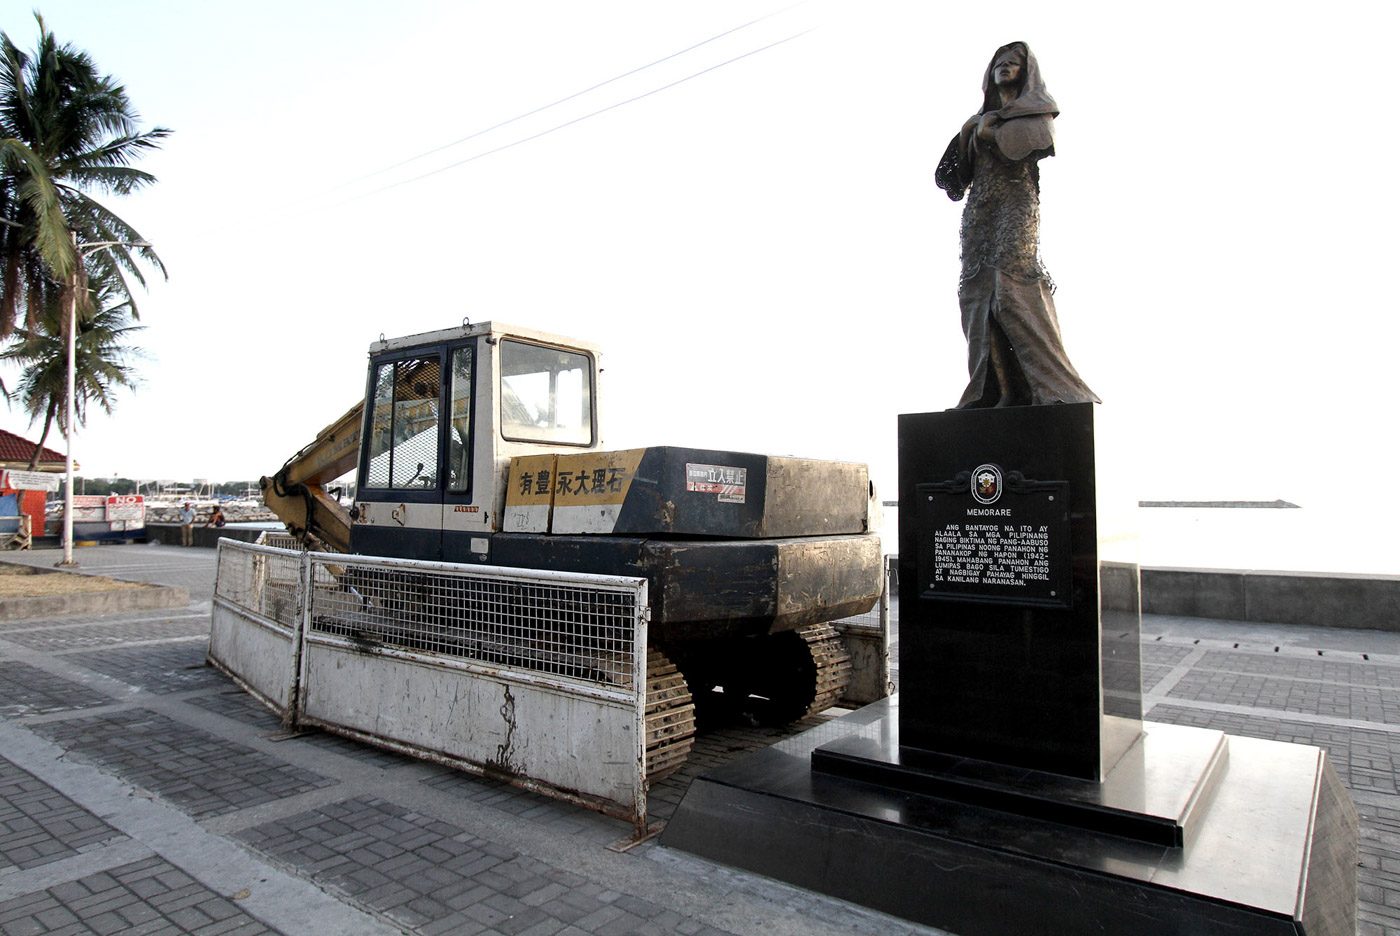 A WEEK BEFORE. A photo taken April 20, 2018 shows a backhoe beside the statue before it was removed. Photo by Inoue Jaena/Rappler 